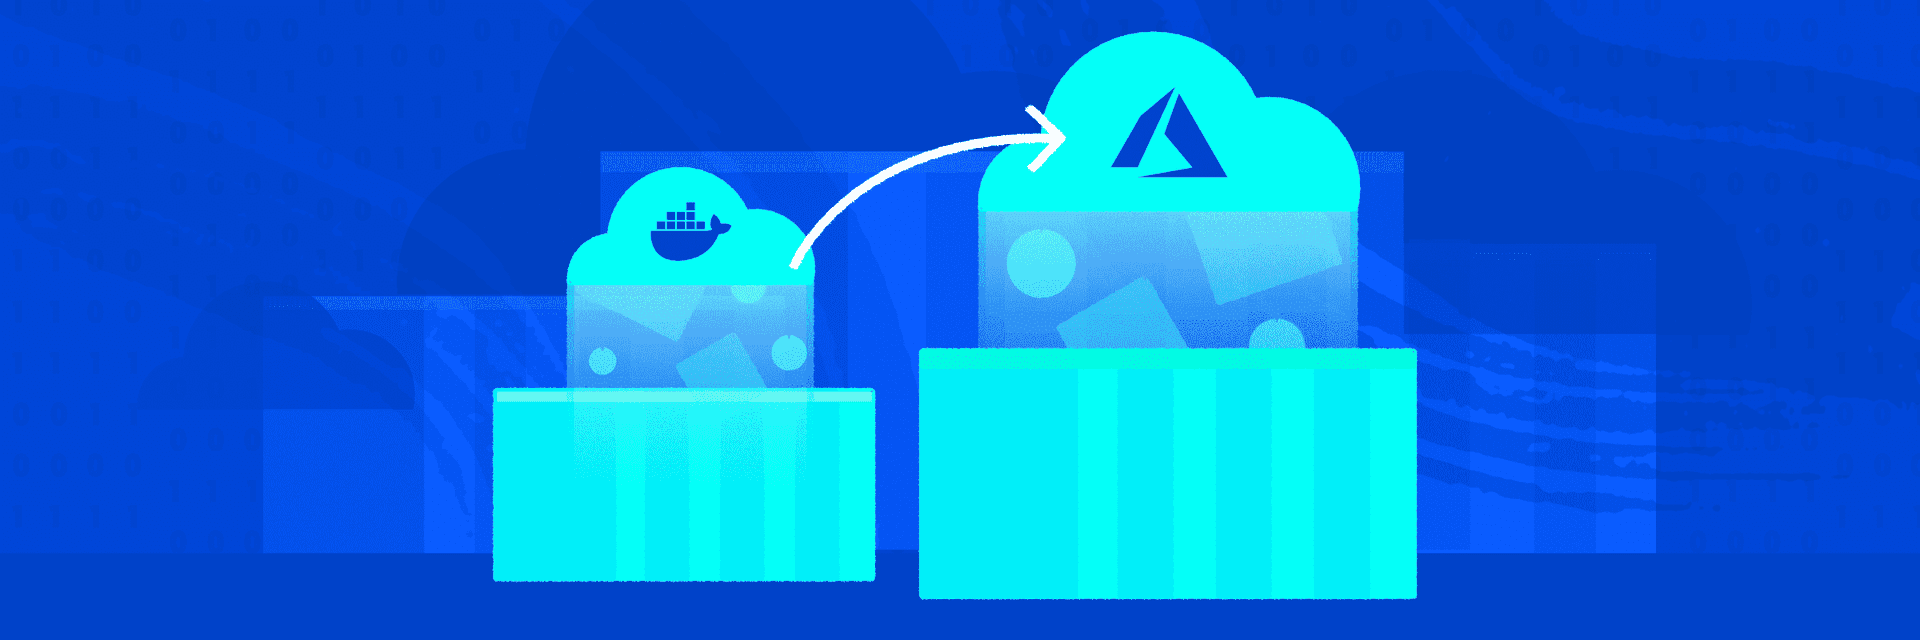 How to build and deploy Docker containers to Azure Container Instances